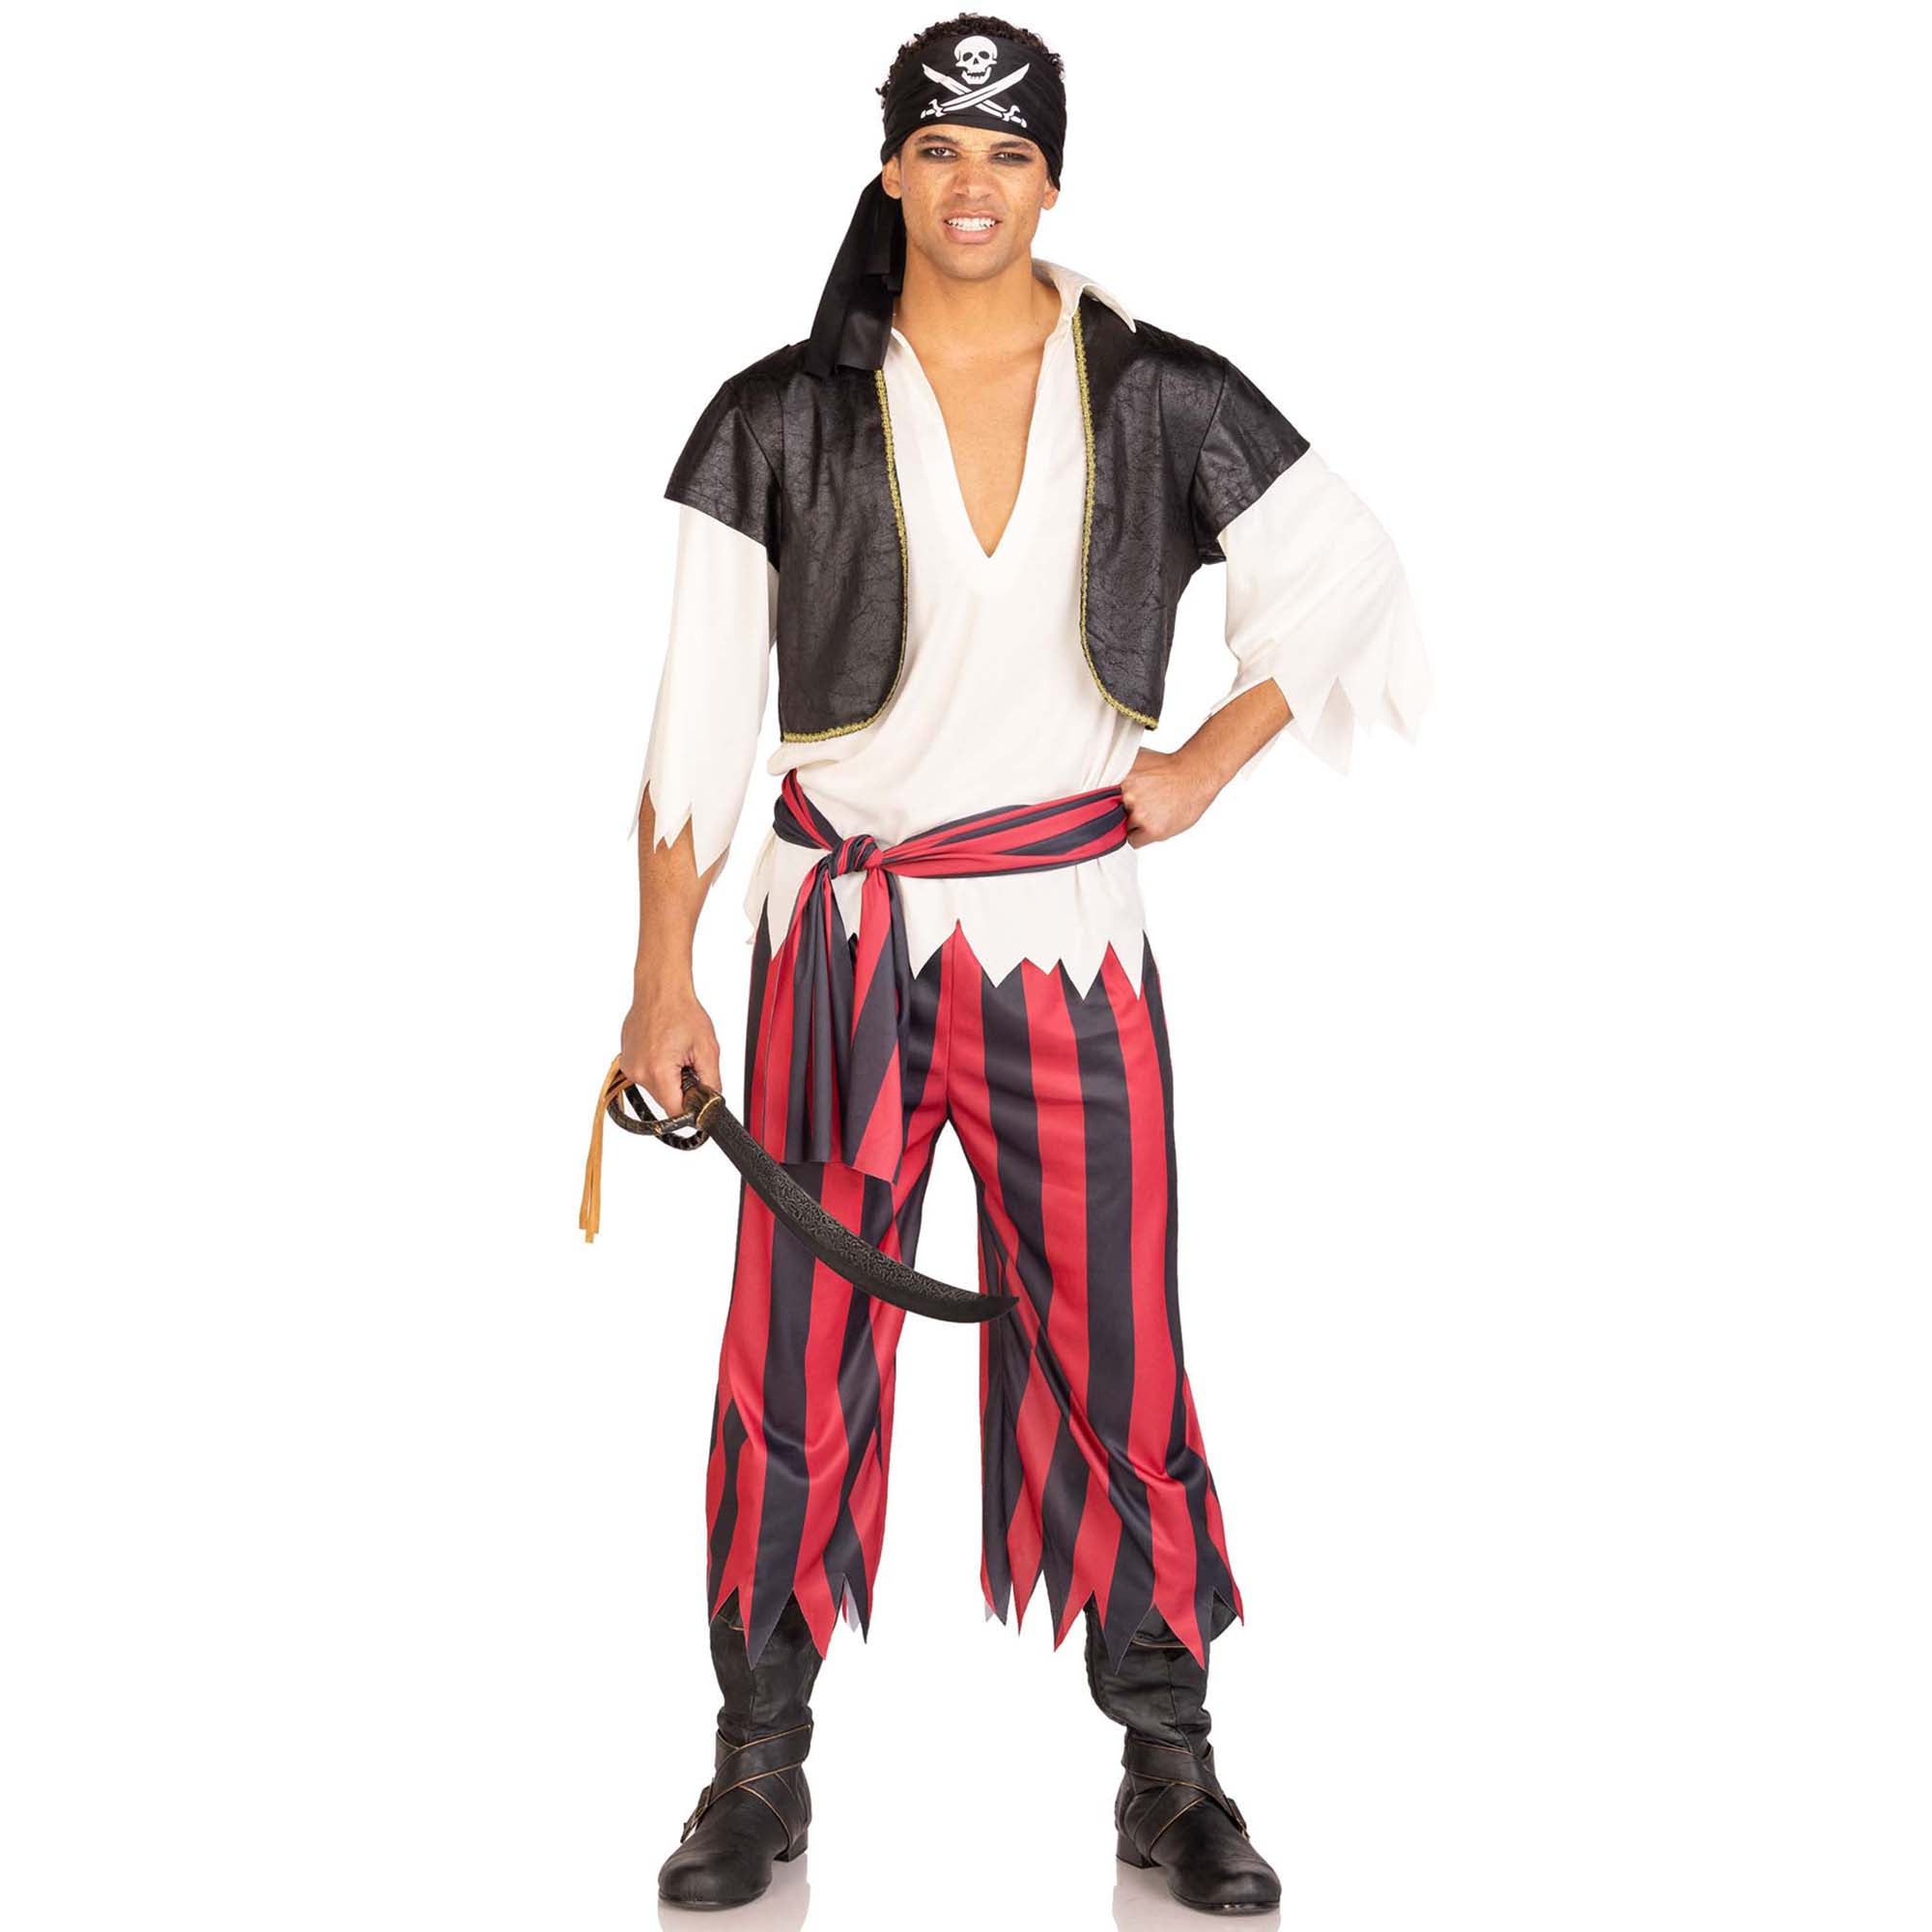 Jolly Roger Pirate Costume for Adults S/M